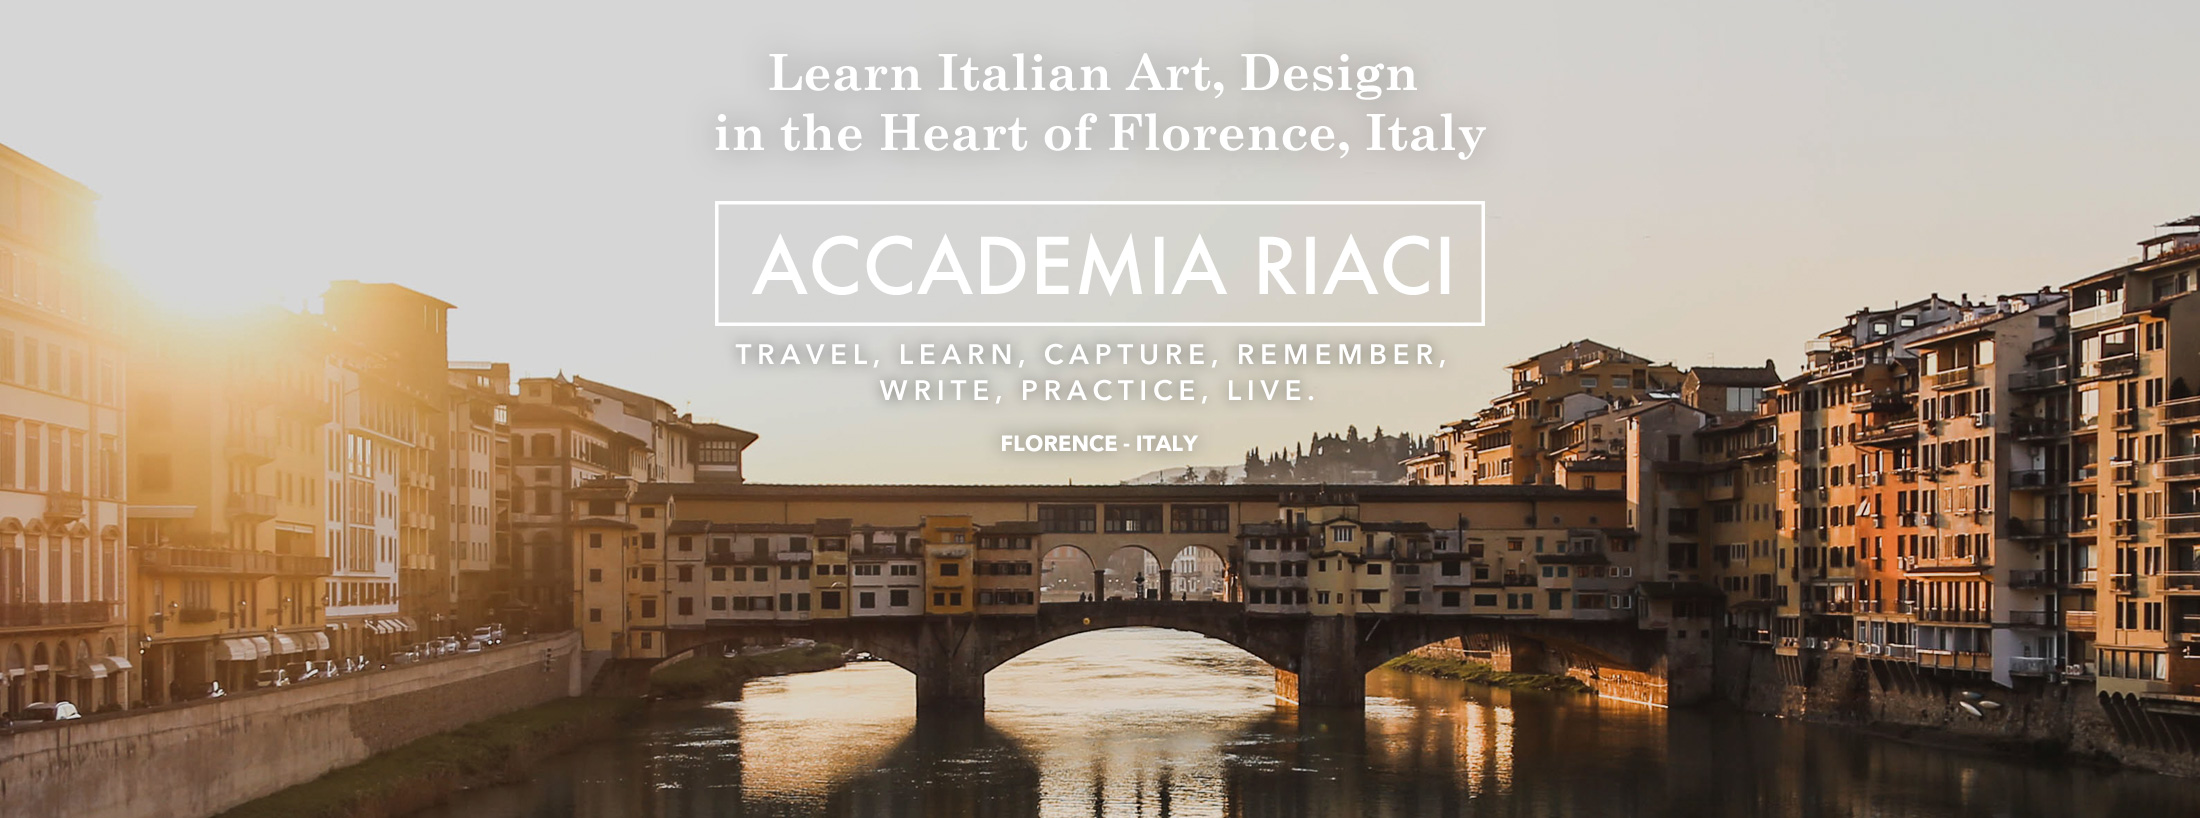 Accademia Riaci - Learn Italian Art, Design in the Heart of Florence, Italy